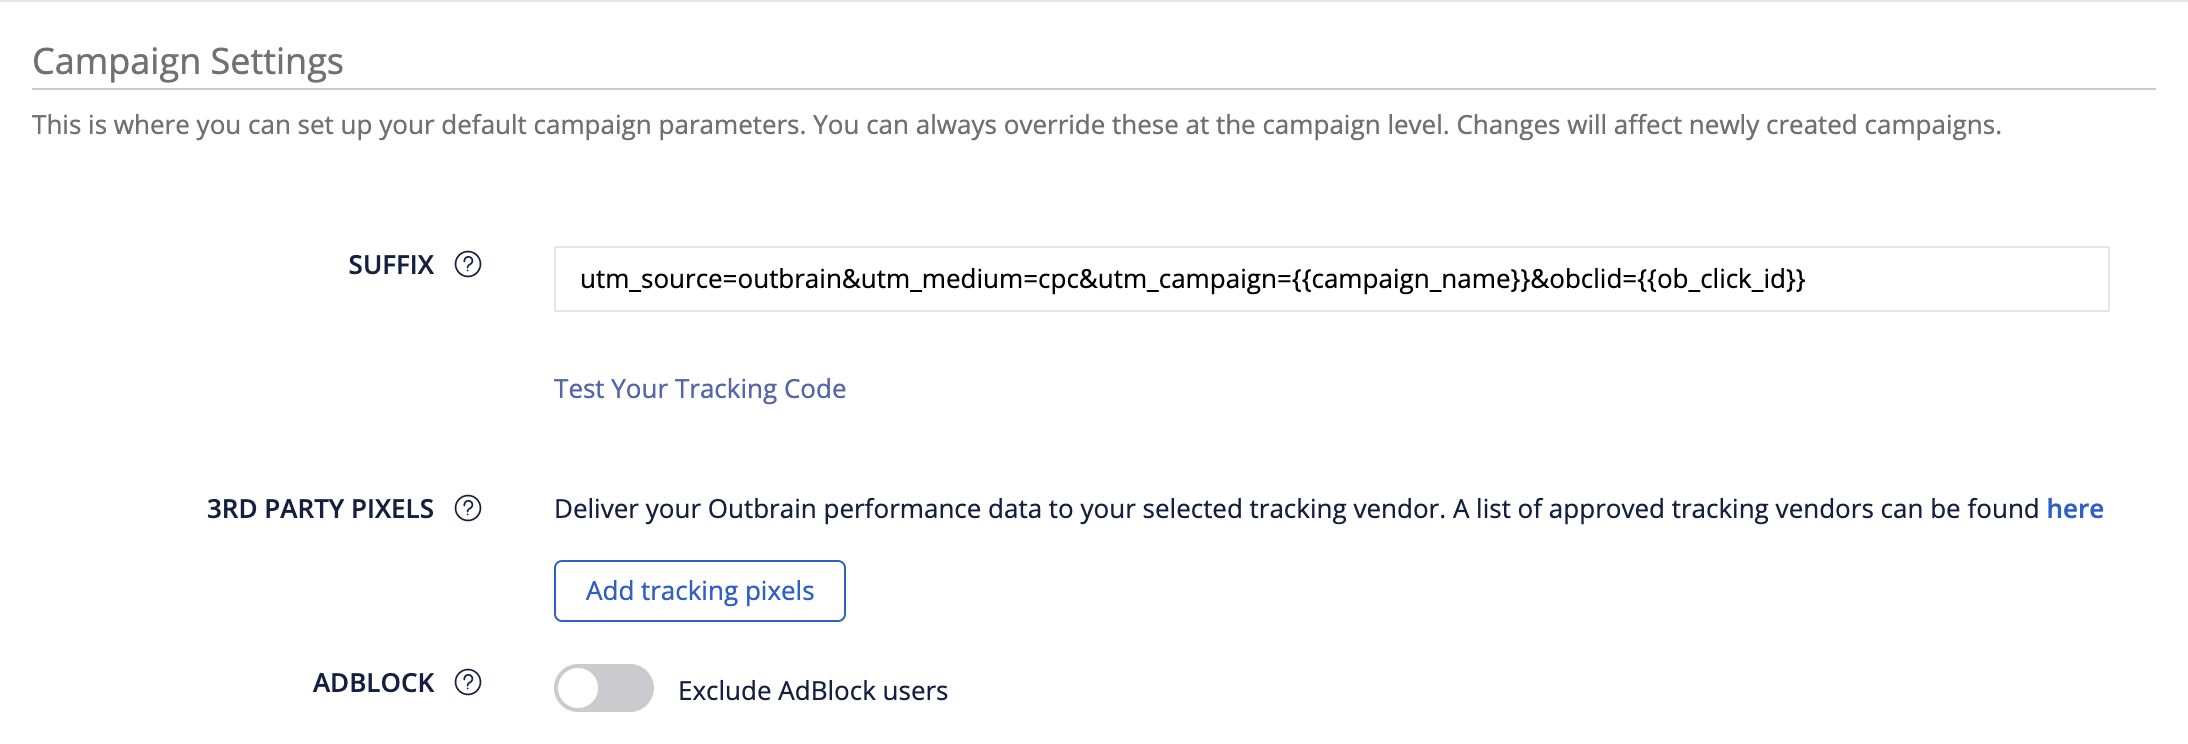 How Do I Implement Pixels to Track Conversions? – Outbrain Help